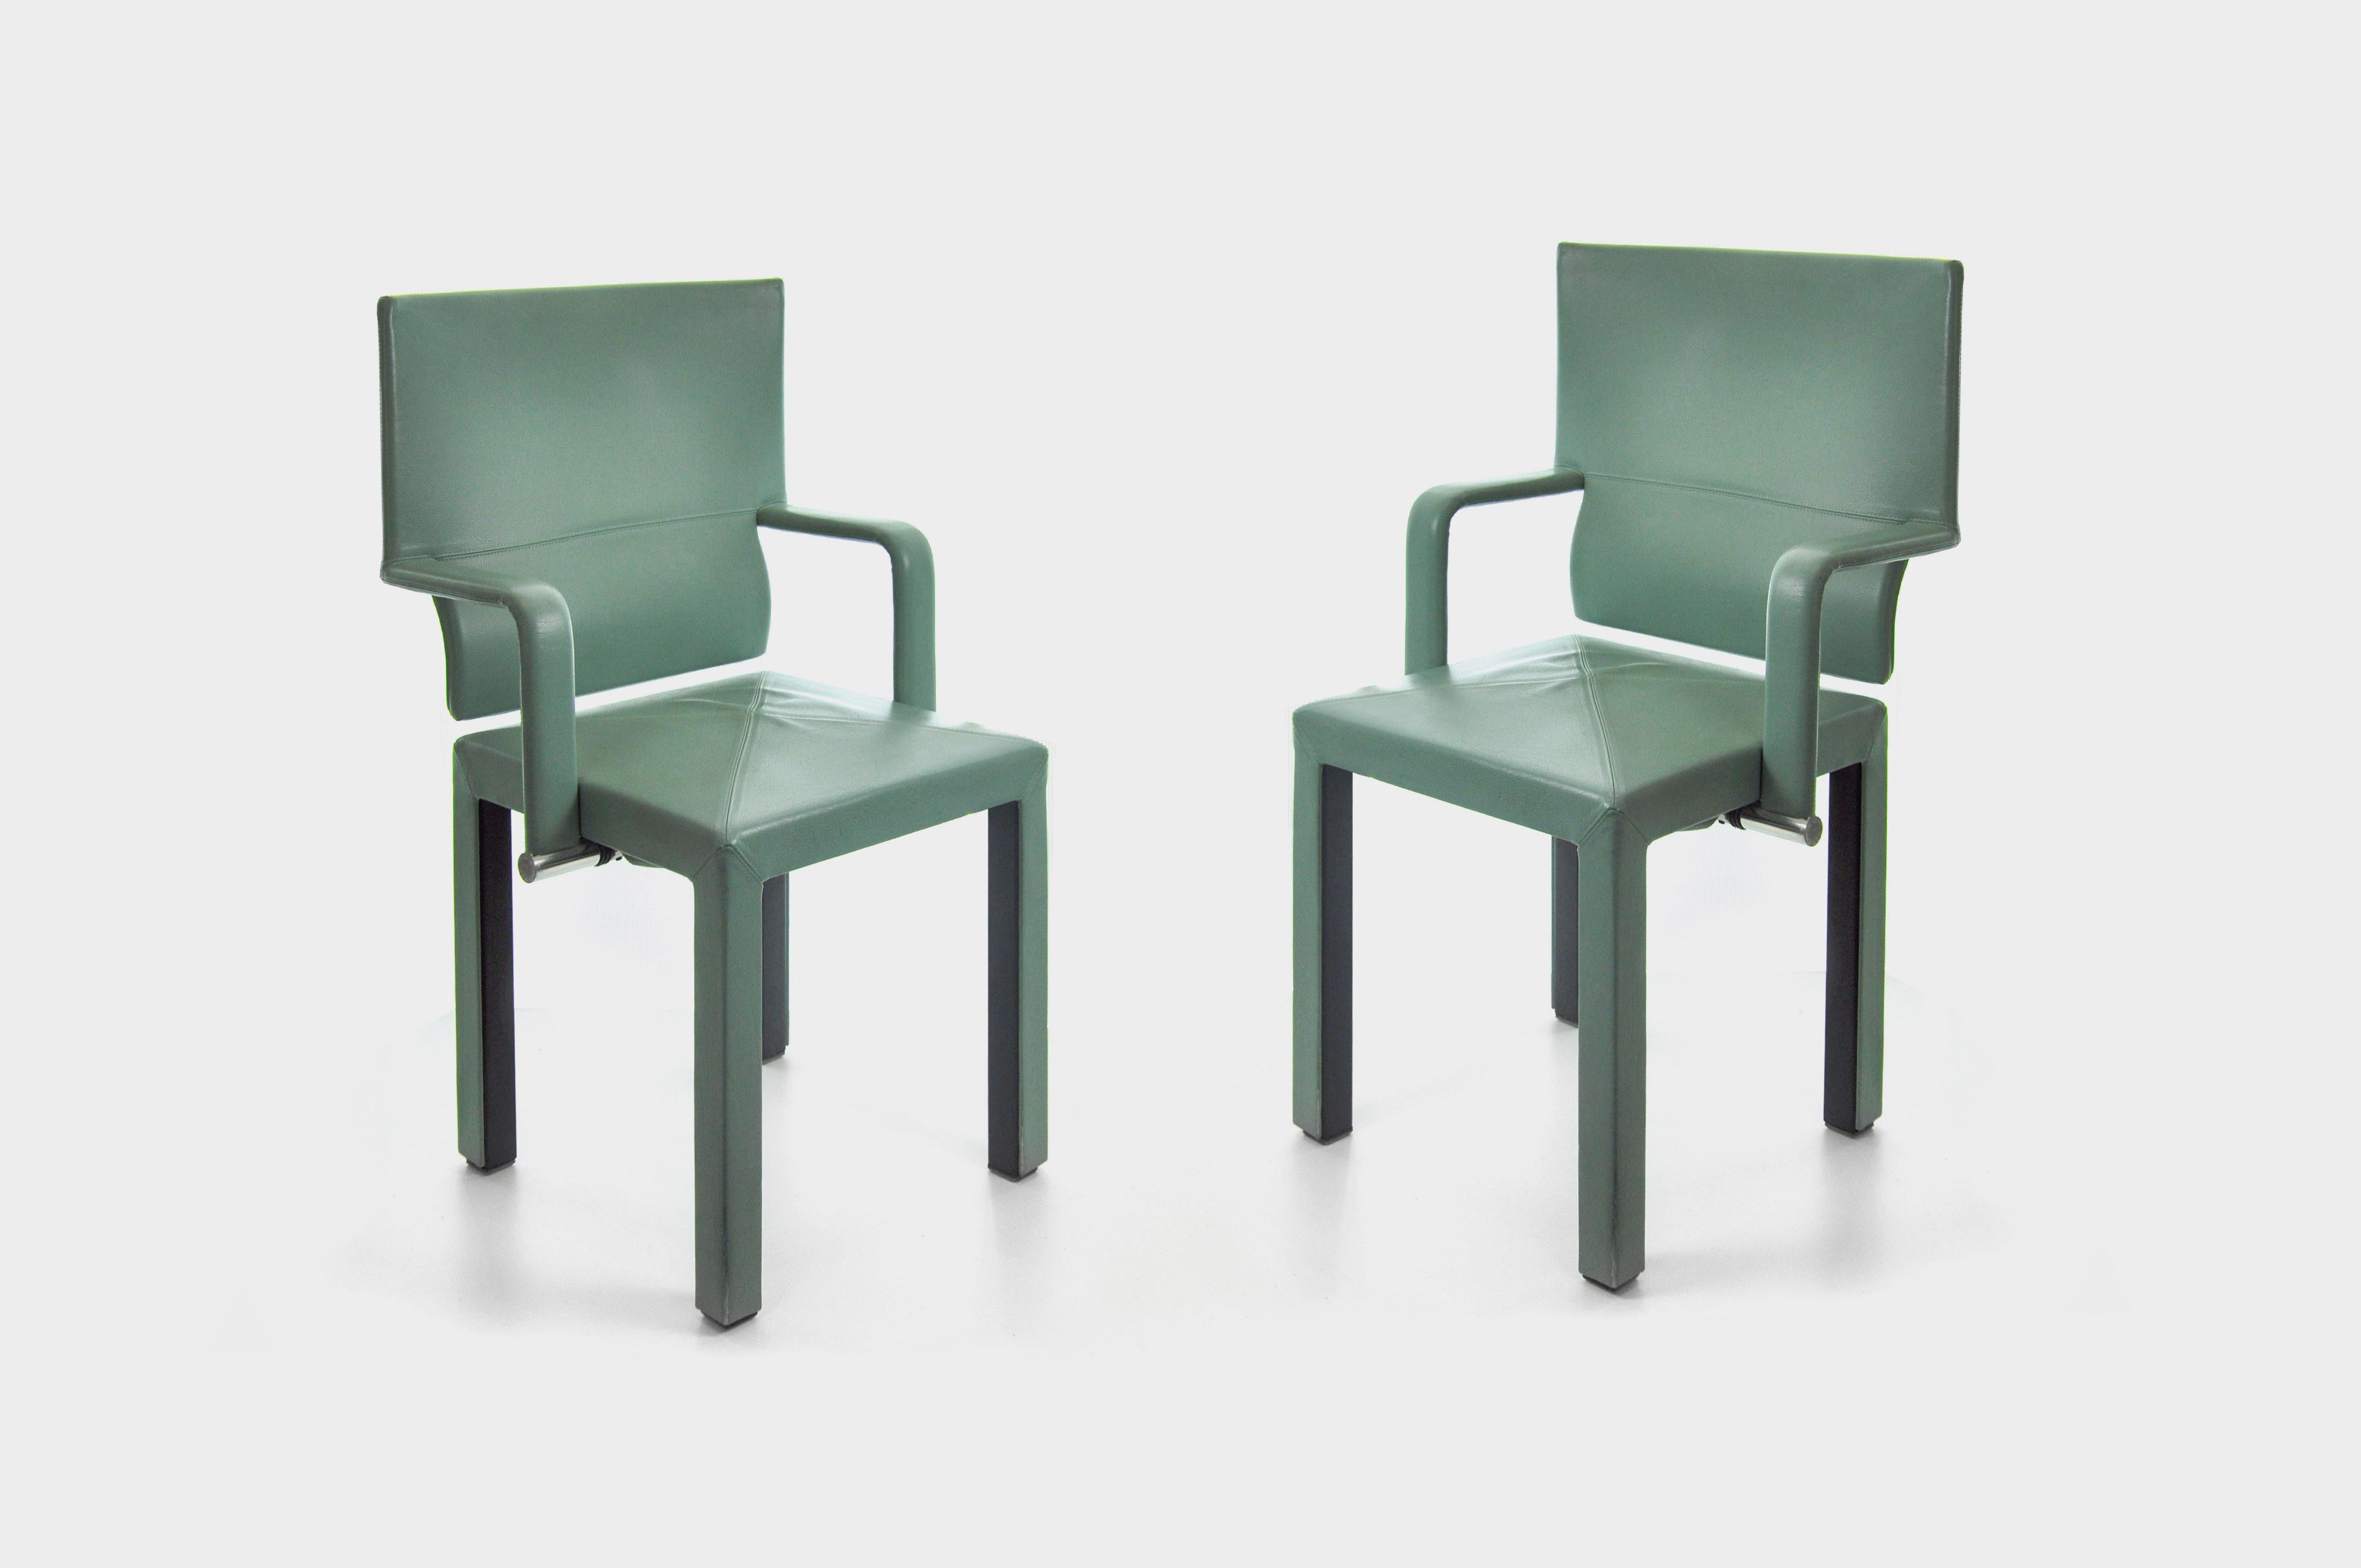 Late 20th Century Set of 2 Mint-Colored Italian Armchairs by Paolo Piva for B&B Italia, 1990s